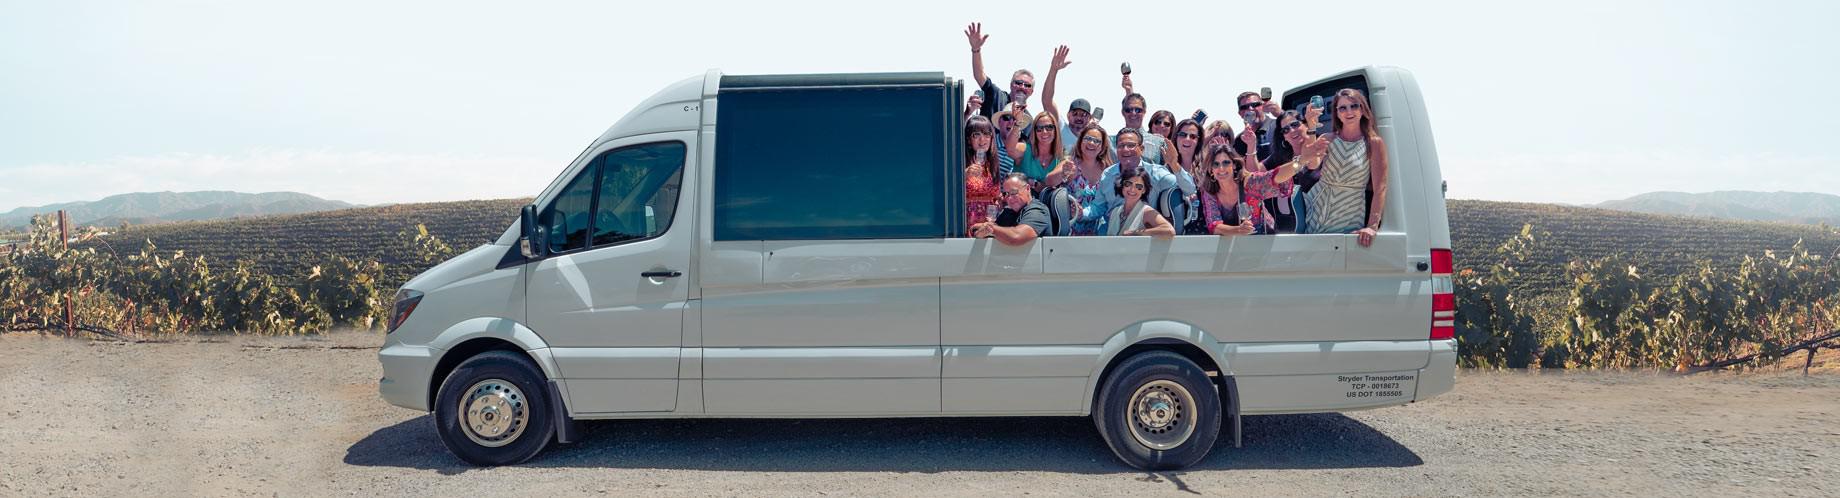 Guests on a private wine tour are happy to be on Grapeline’s exclusive convertible Mercedes Limousine Sprinter Shuttle. This shuttle offers panoramic views and a retractable roof allowing touring guests to enjoy stunning views in Paso Robles wine country.